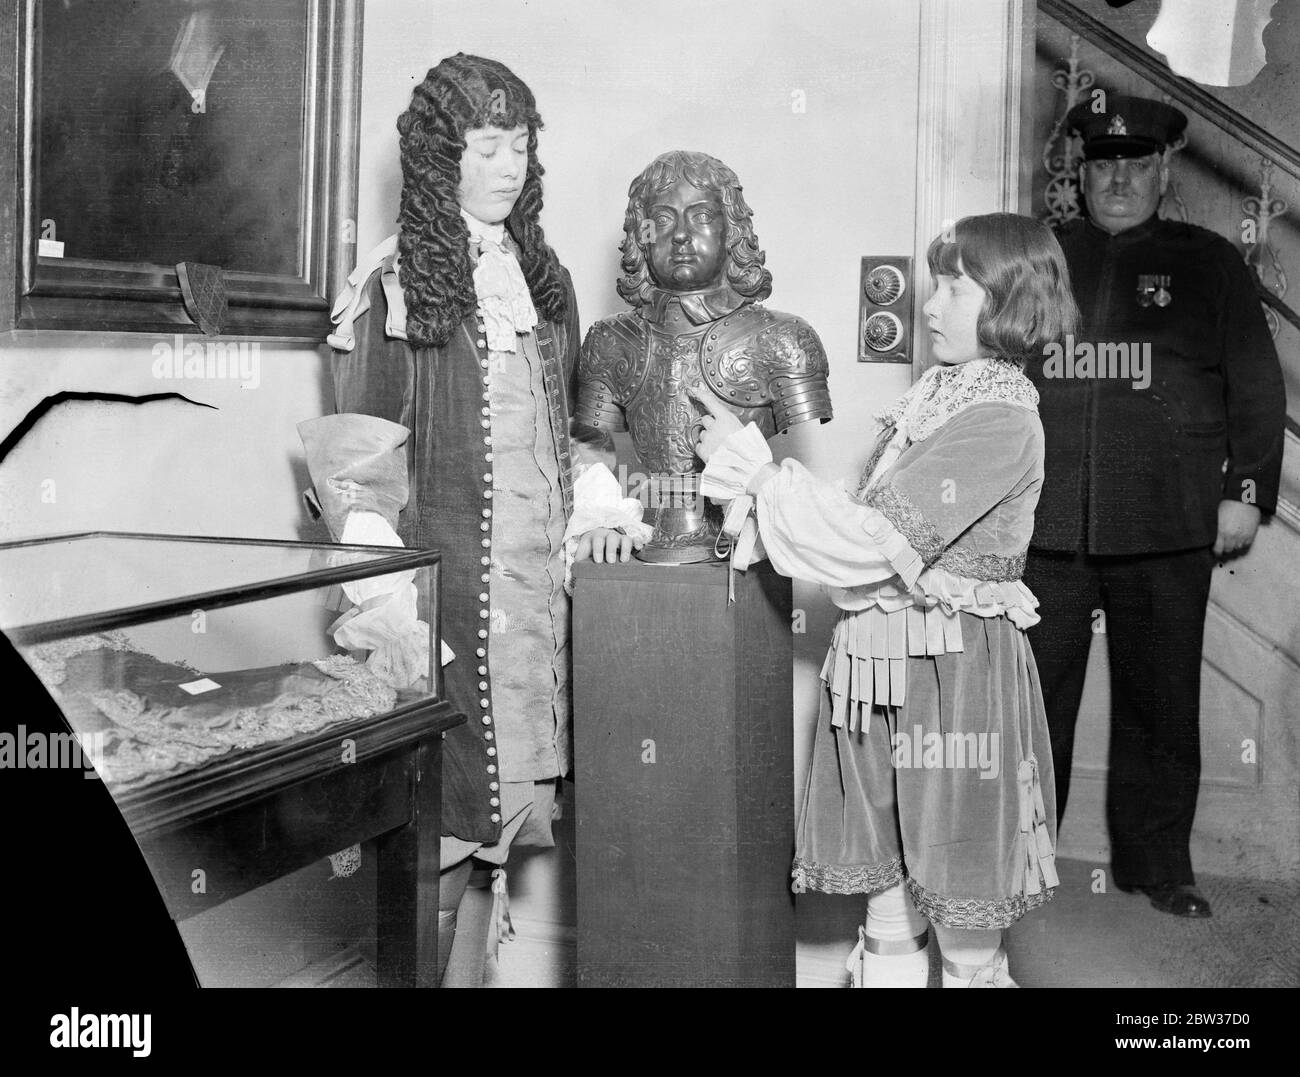 Bust of Charles II as a boy at exhibition of relics of his period in London . An exhibition of relics of the period of King CHarles II , has been organised in London in aid of the Young Womens Christian association , at Grosvenor Place , London . Among them is the only known bust of King Charles II by Jacqueline Nicolson , showing King CHarles at the age of 11 . Photo shows , the bust of King Charles II when a boy on view at the exhibition . 28 January 1932 Stock Photo